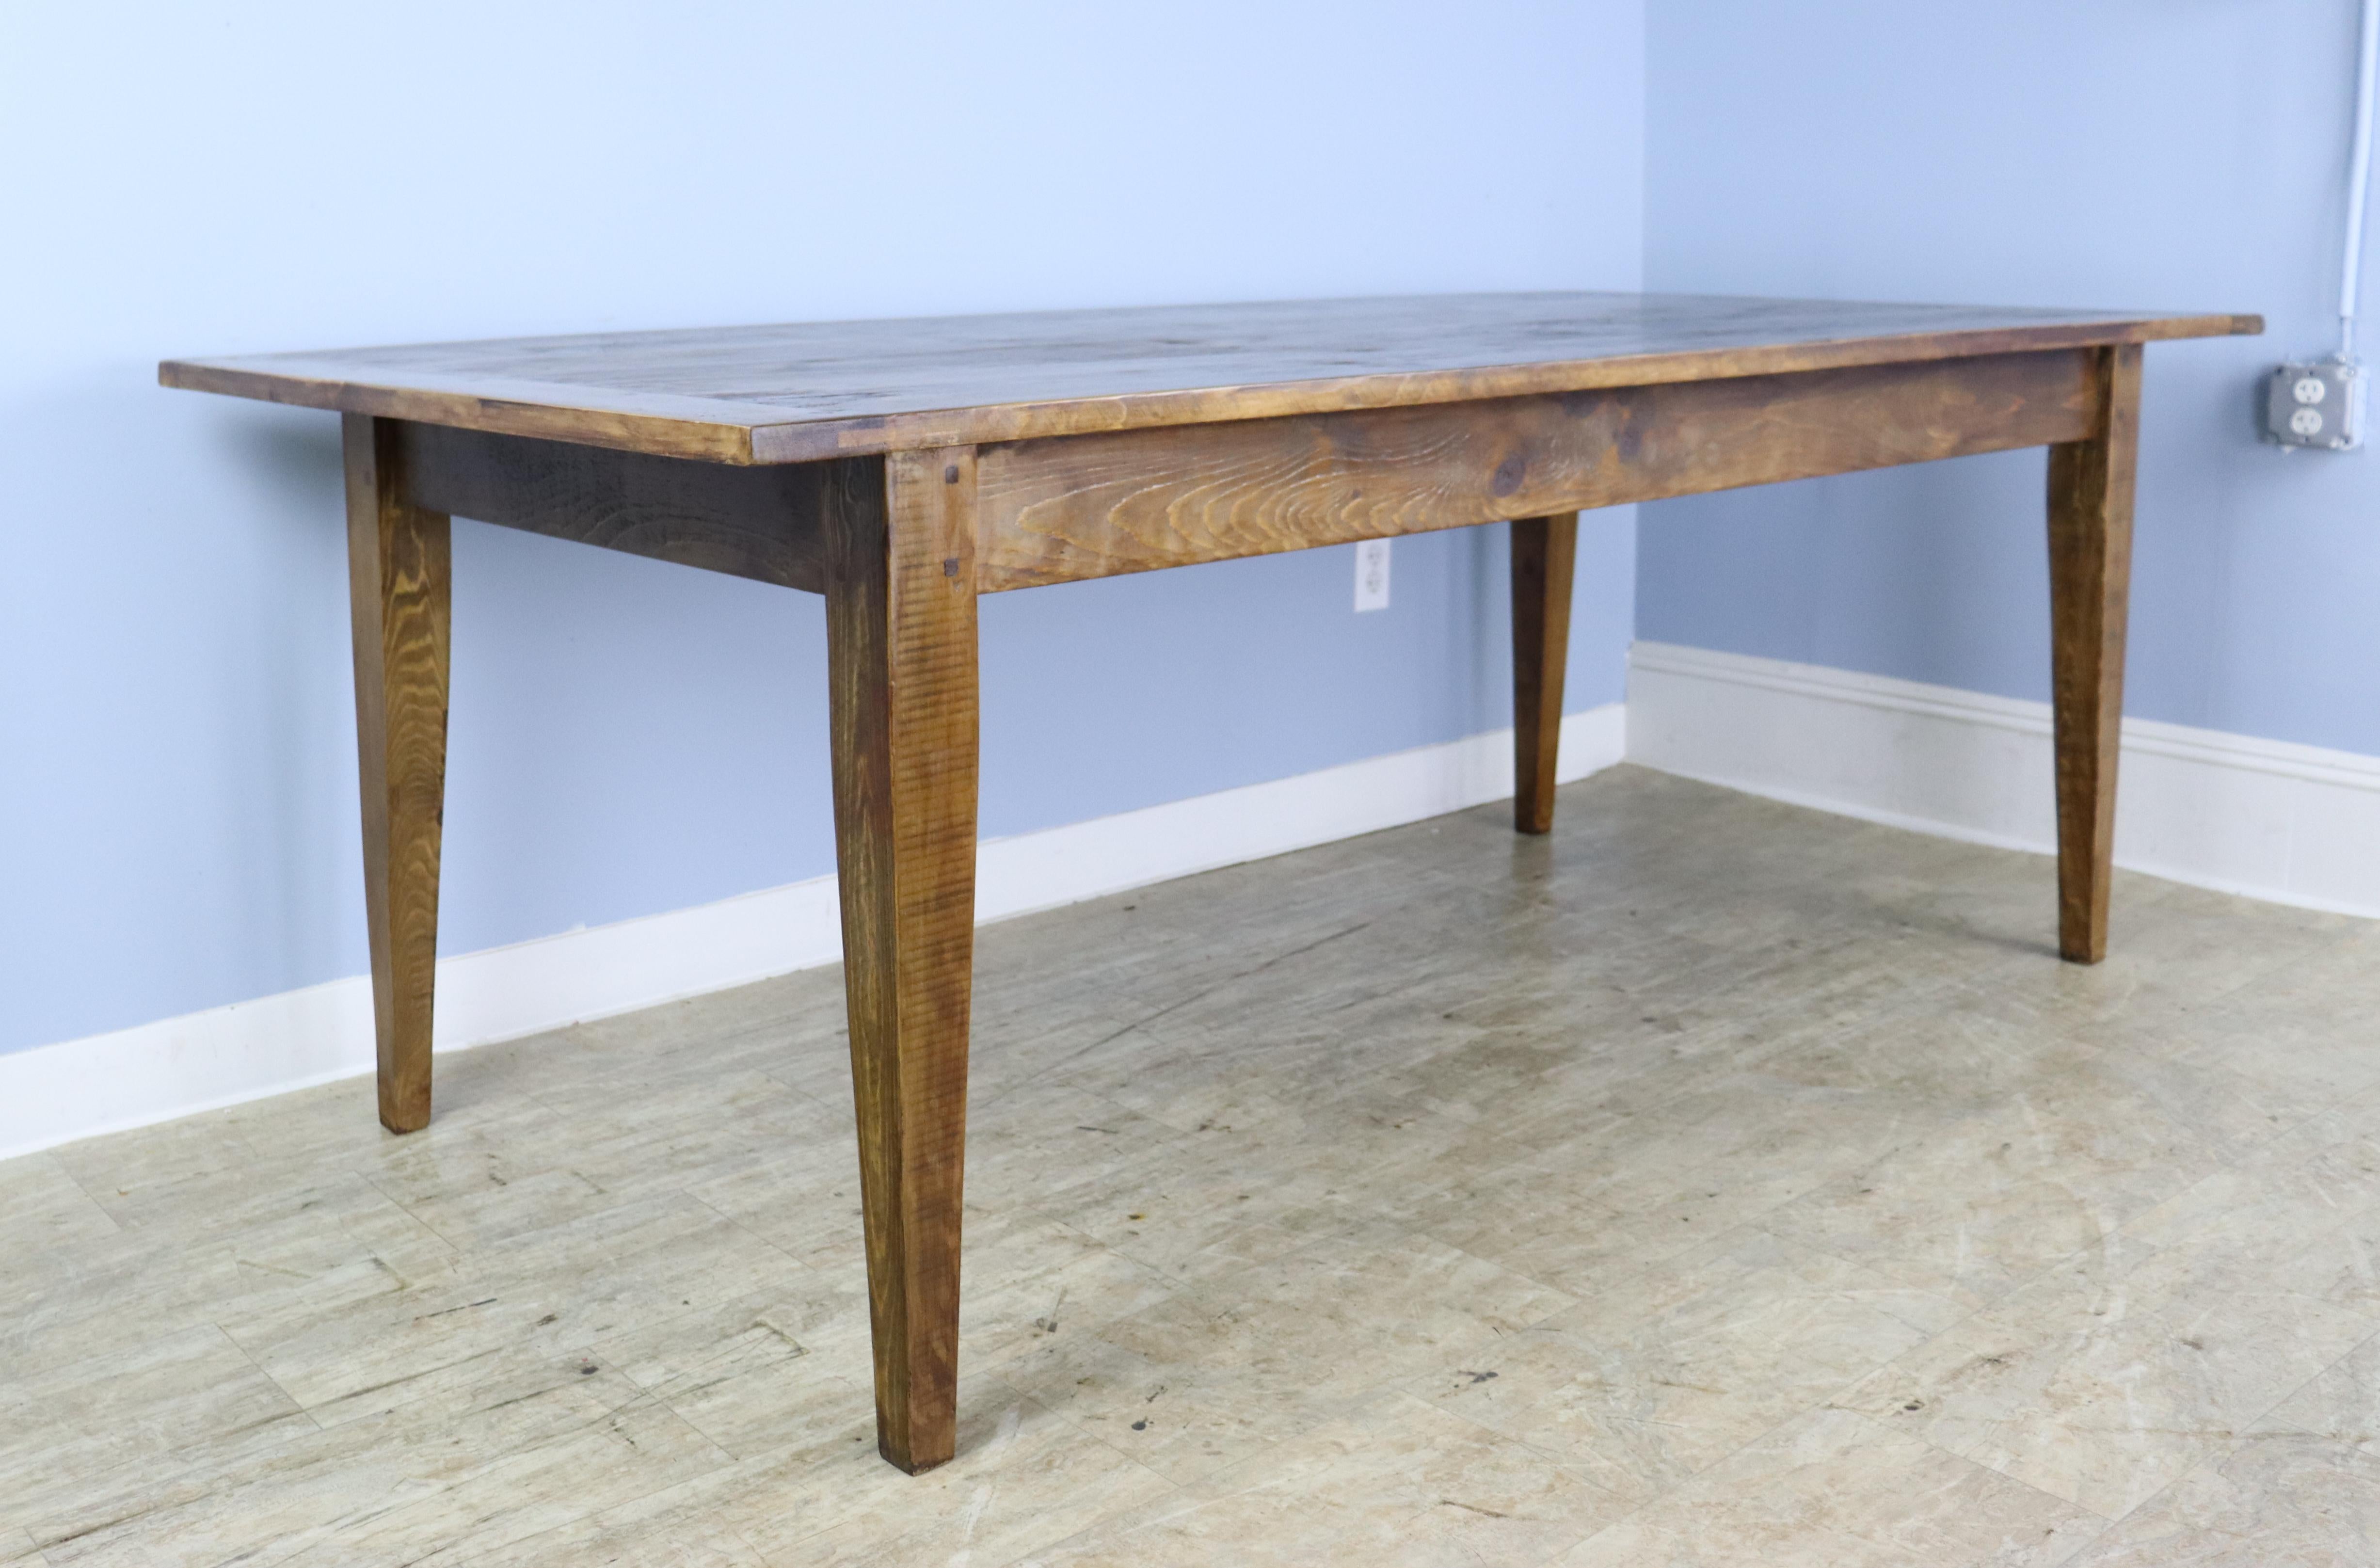 A generously proportioned, thick topped farm table in medium pine 7'. Great depth to the top. With 68 inches between the legs, this table can easily fit eight with room for a Thanksgiving dinner as well! The apron height of 25 inches is good for